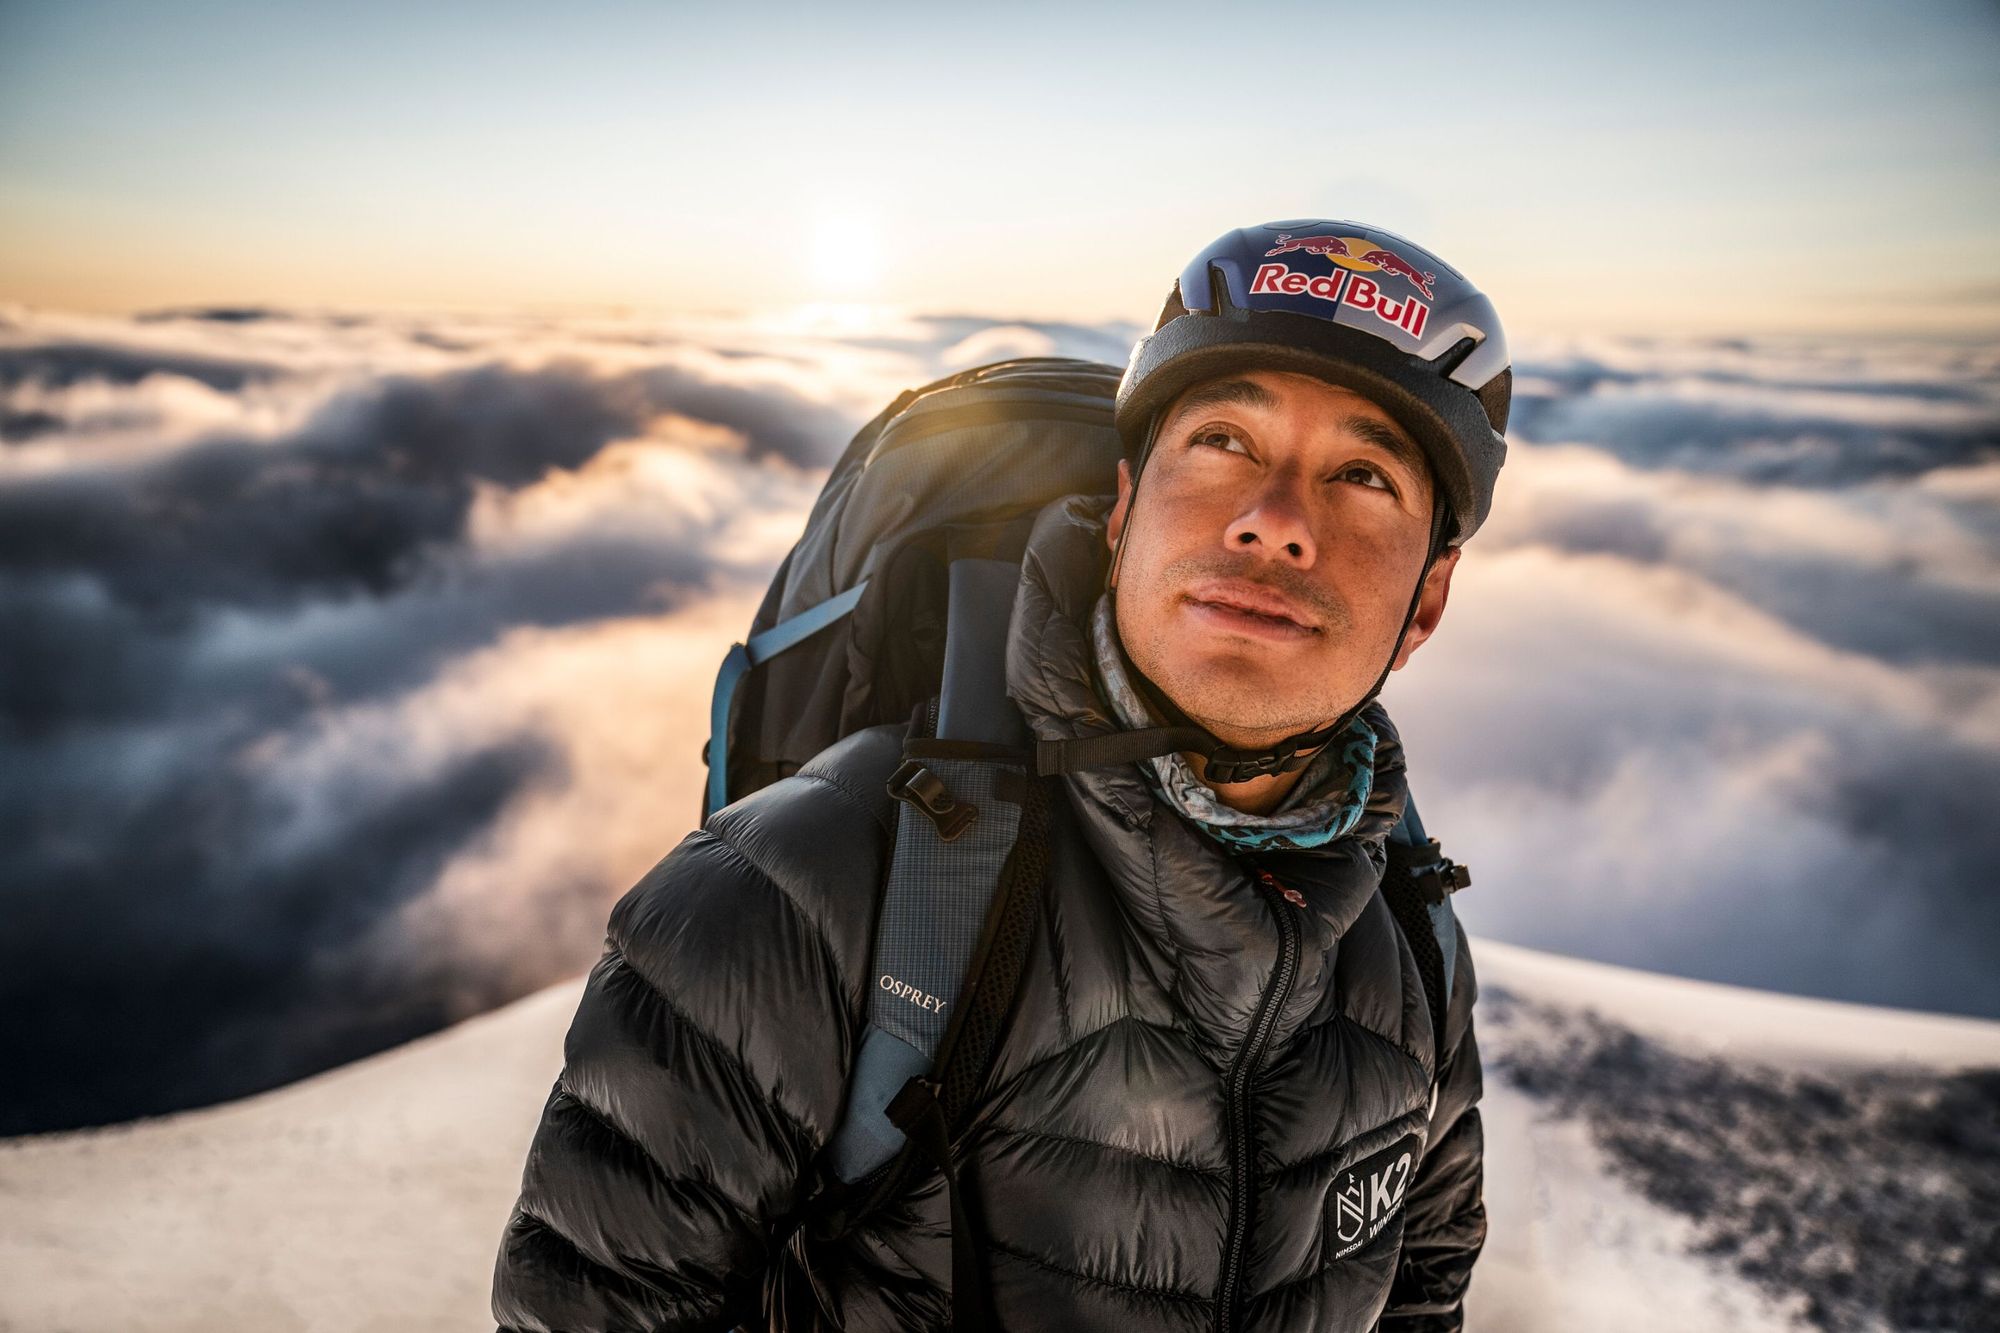 A portrait of Nimsdai Purja, the start of the mountaineering documentary 14 Peaks. Photo: Stefan Voitl / Red Bull Content Pool